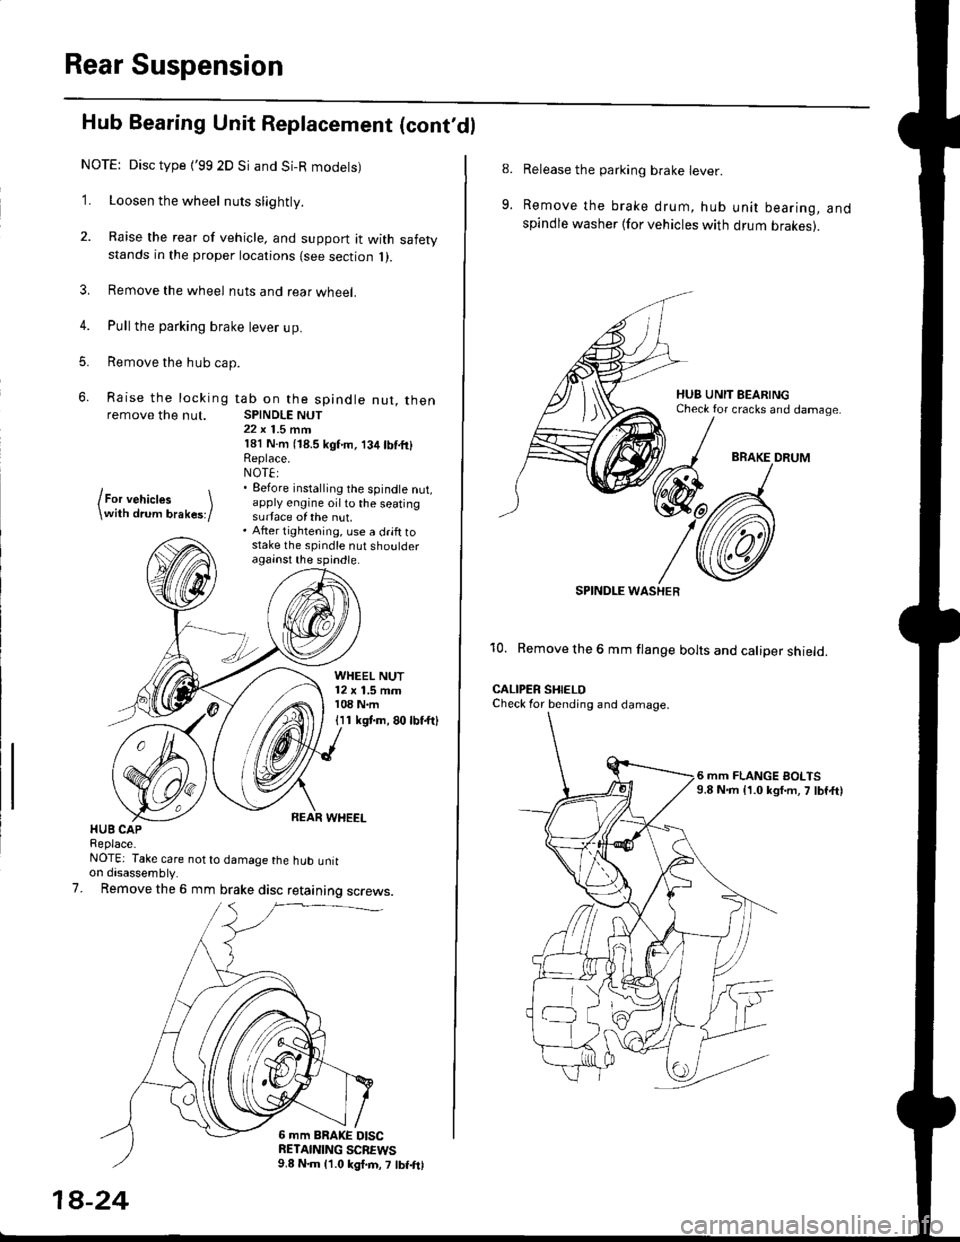 HONDA CIVIC 1996 6.G Owners Guide Rear Suspension
Hub Bearing Unit Replacement (contdl
NOTE: Disc type {99 2D Si and Si-R modets)
1. Loosen the wheel nuts slightly.
2. Raise the rear of vehicle, and support it with safetystands in t